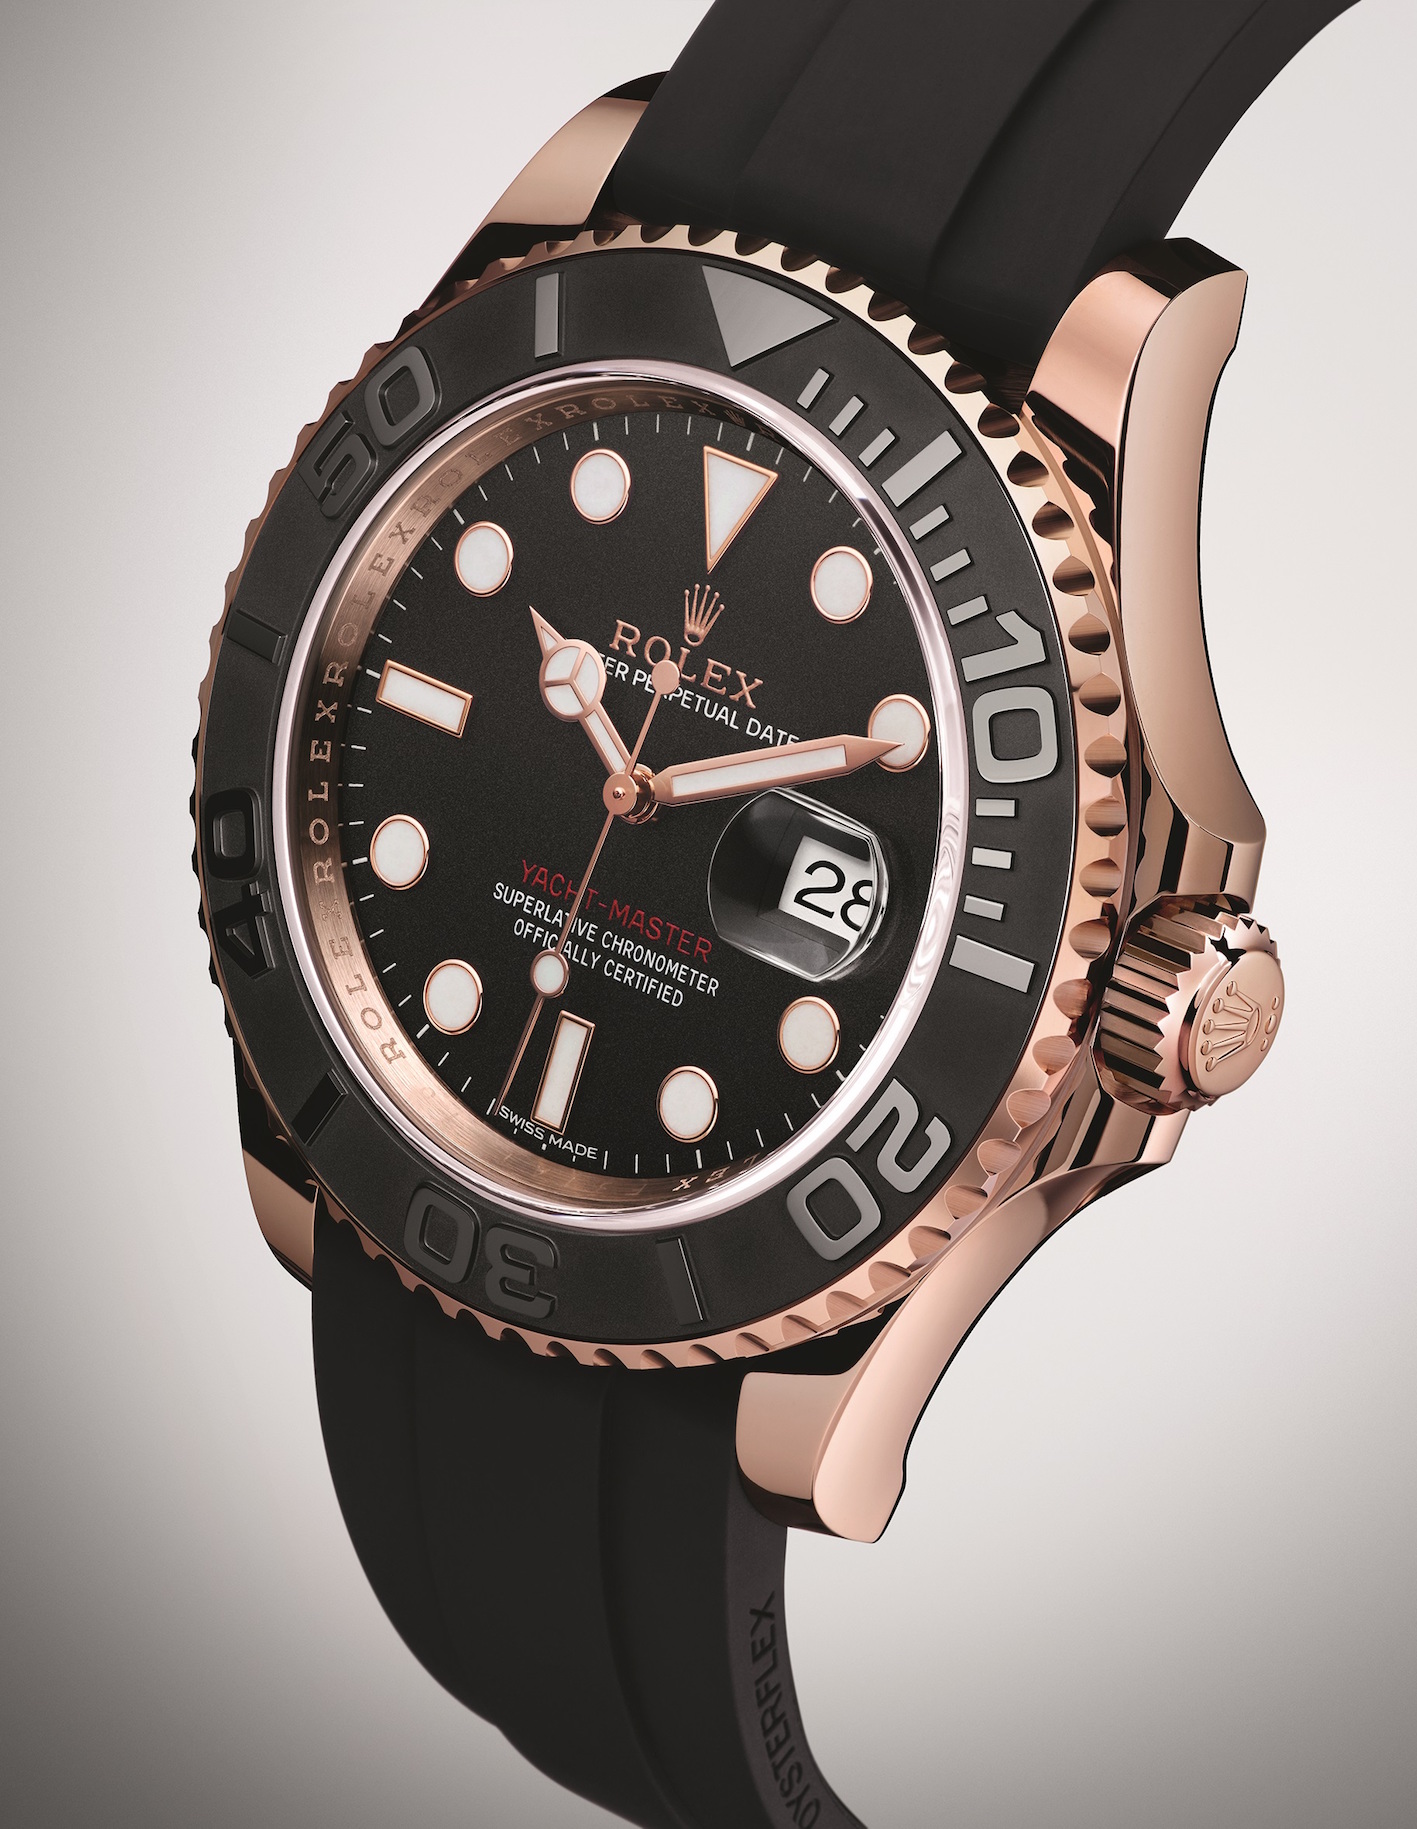 Oyster Perpetual Yacht-Master, Rolex.